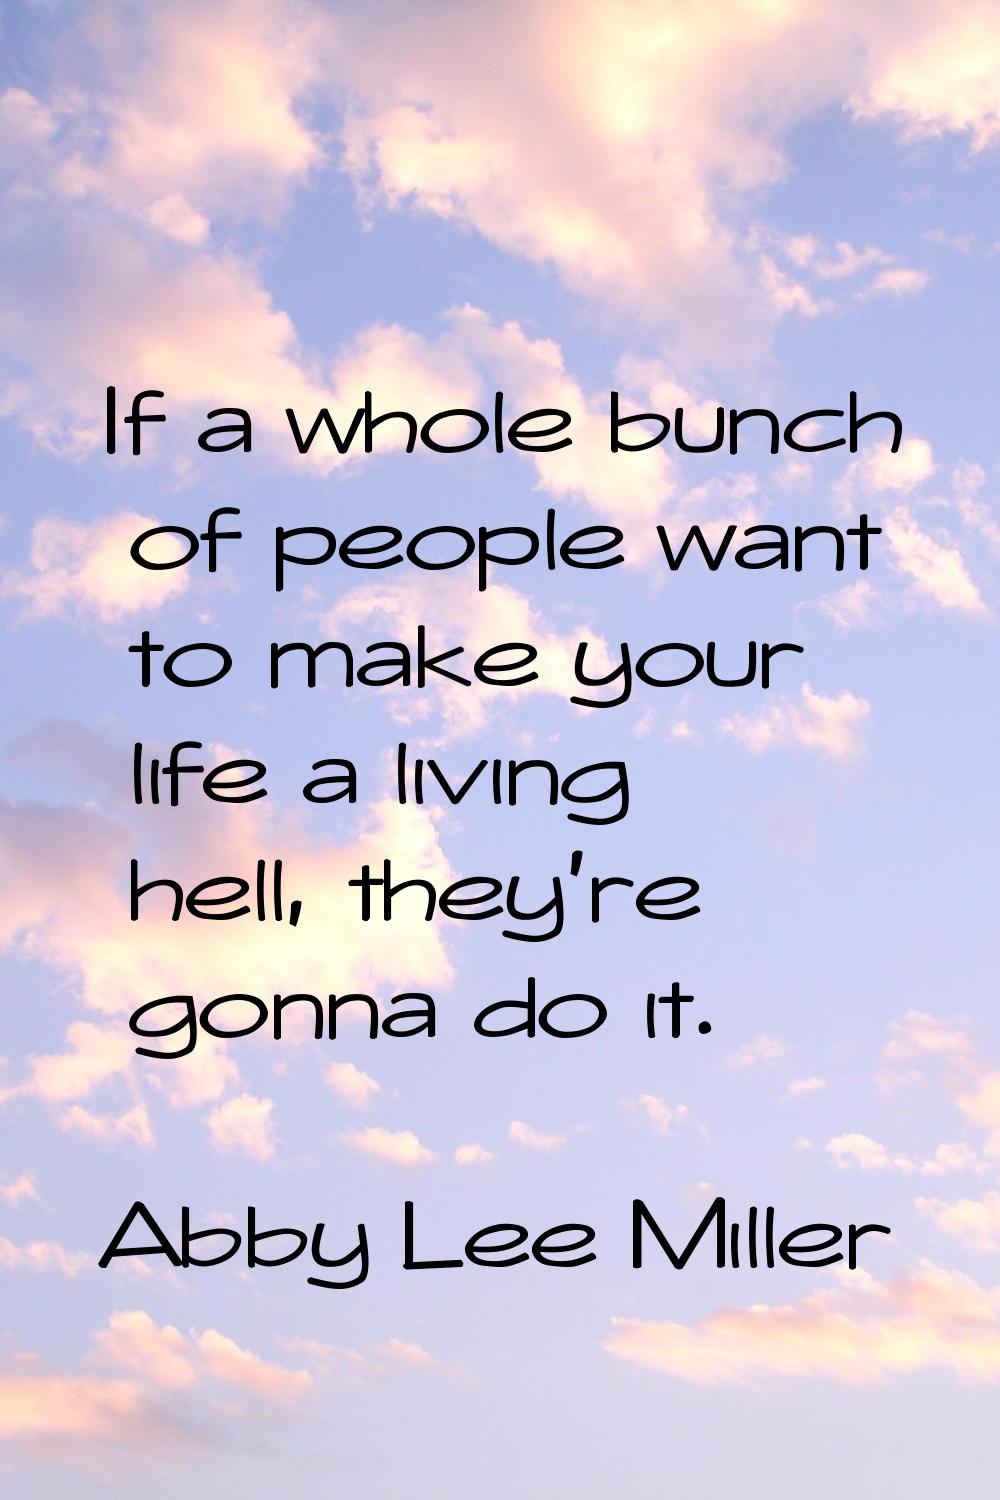 If a whole bunch of people want to make your life a living hell, they're gonna do it.